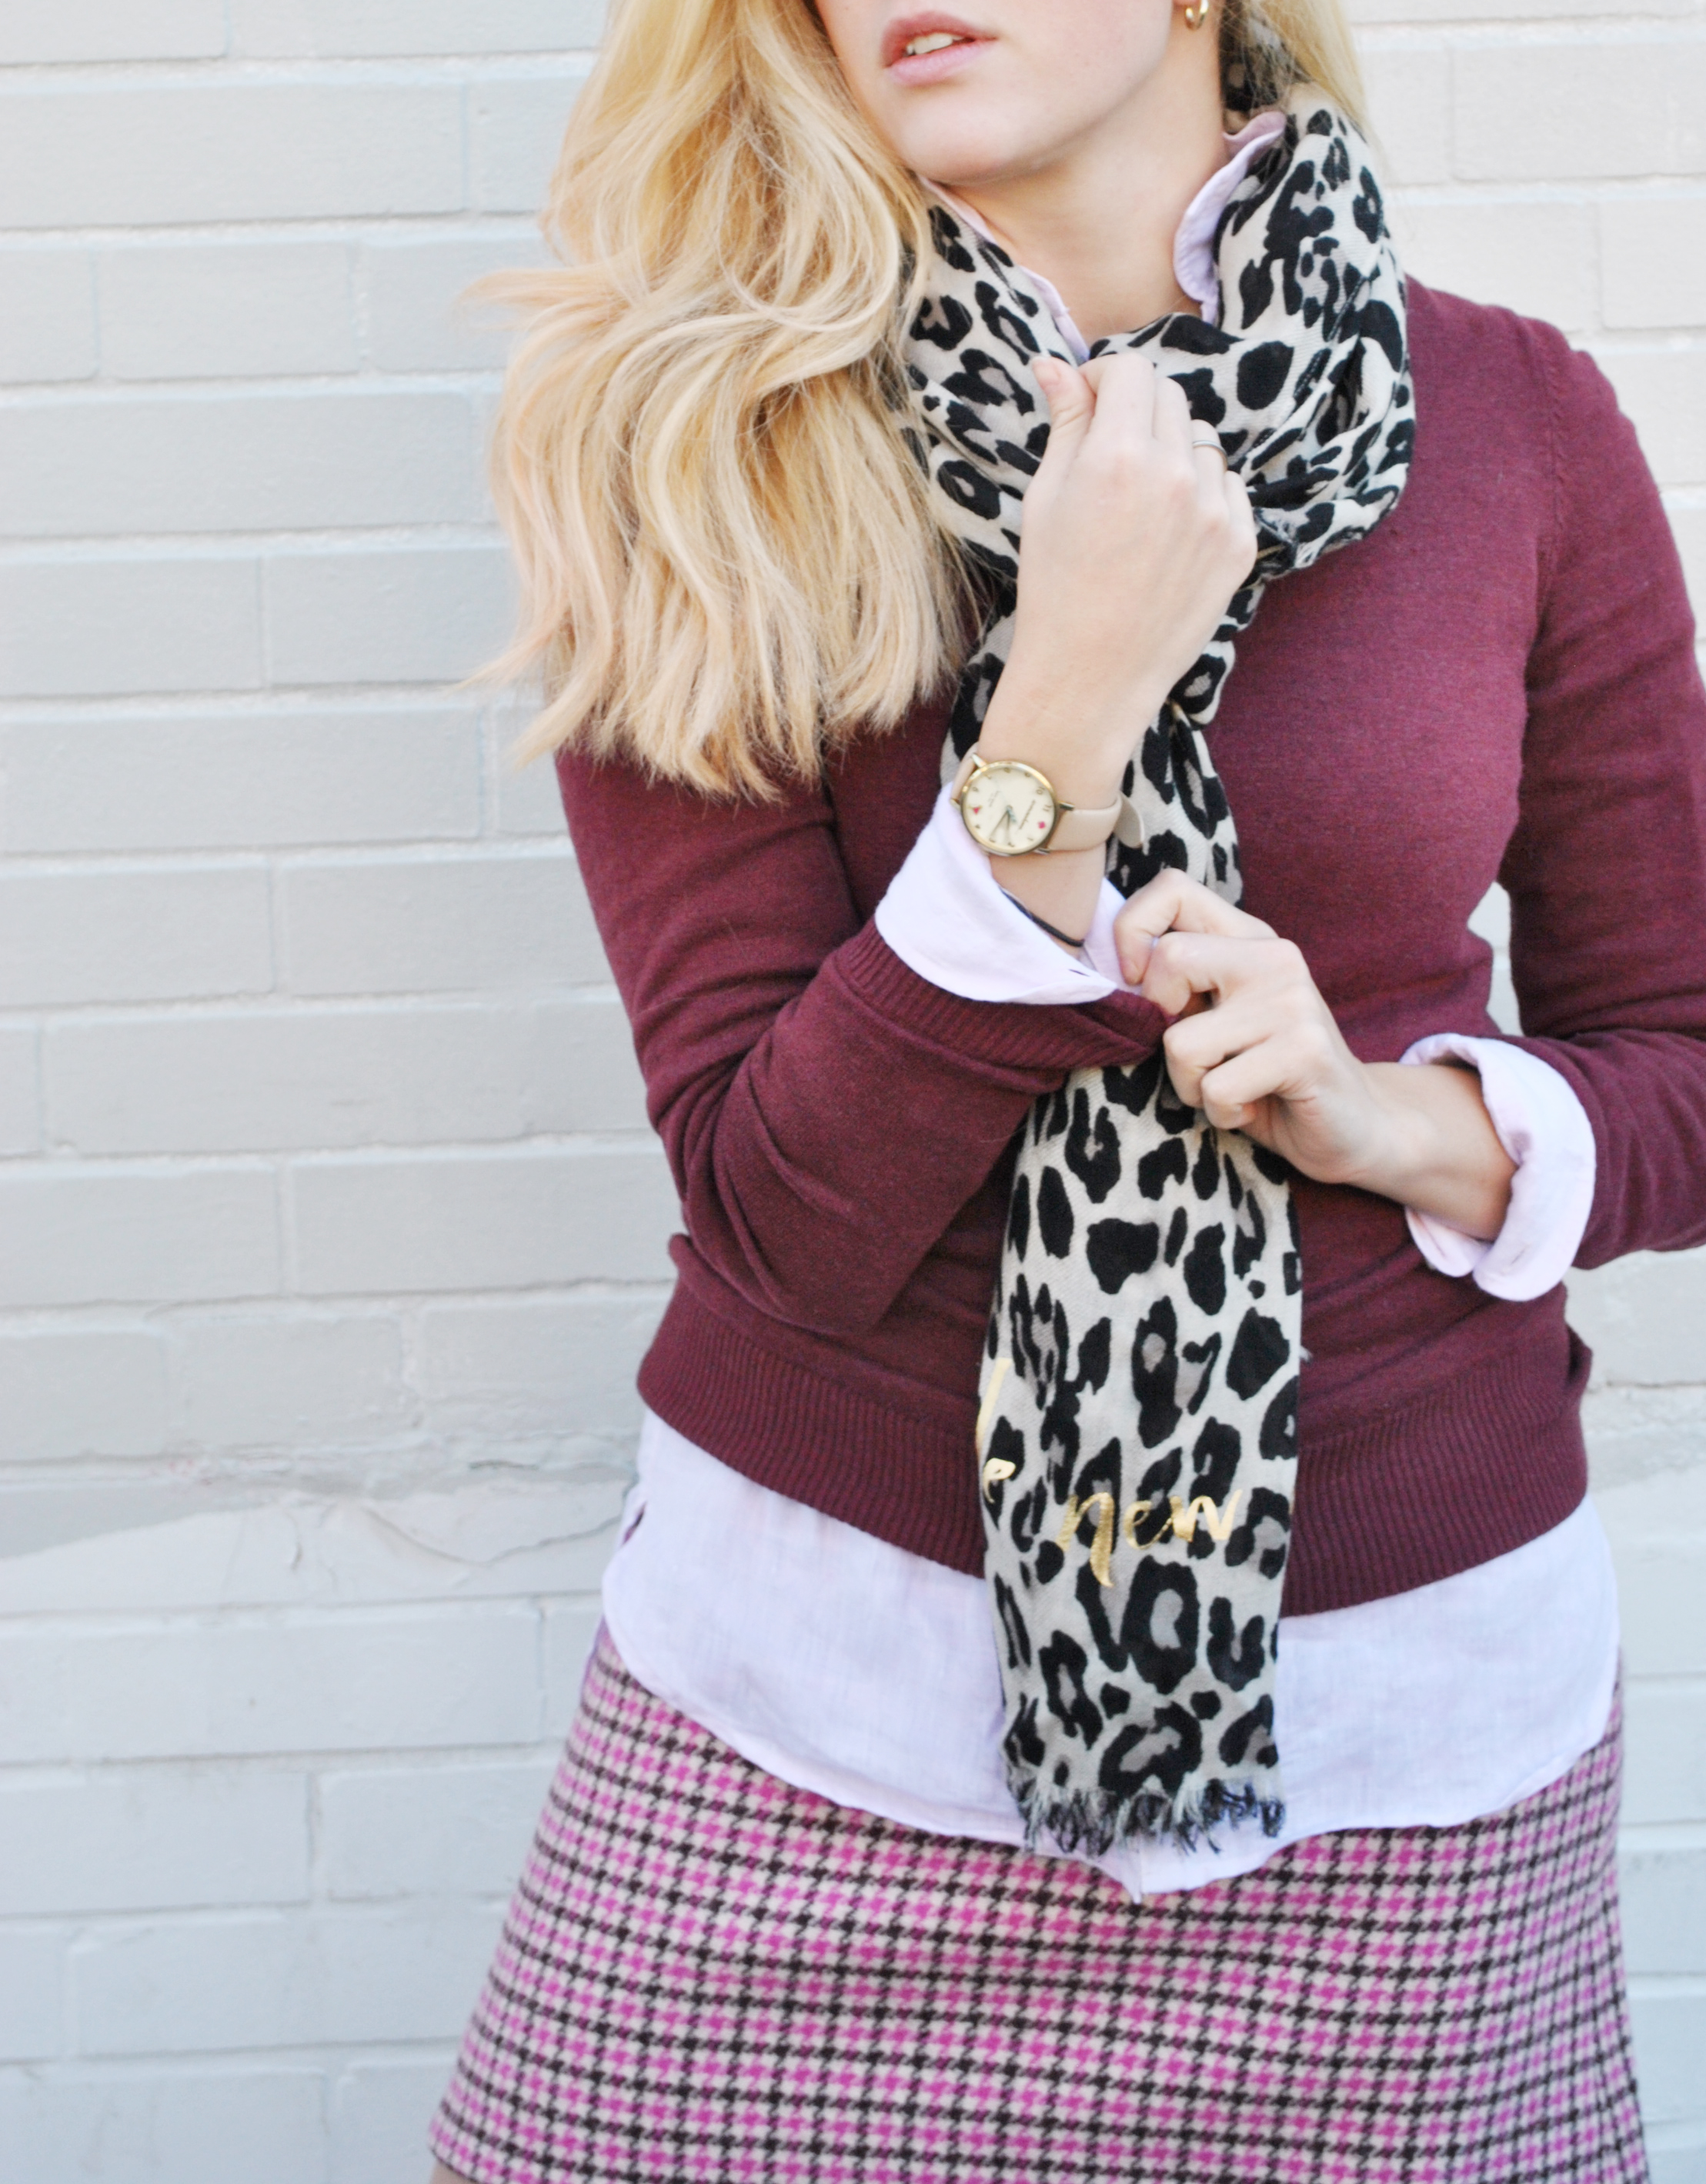 thoughtfulwish | preppy outfit, fall outfit, thanksgiving outfit, houndstooth, pattern mixing, leopard print, fashion blogger, boston fashion, new england fashion, prepster, meredith wish 